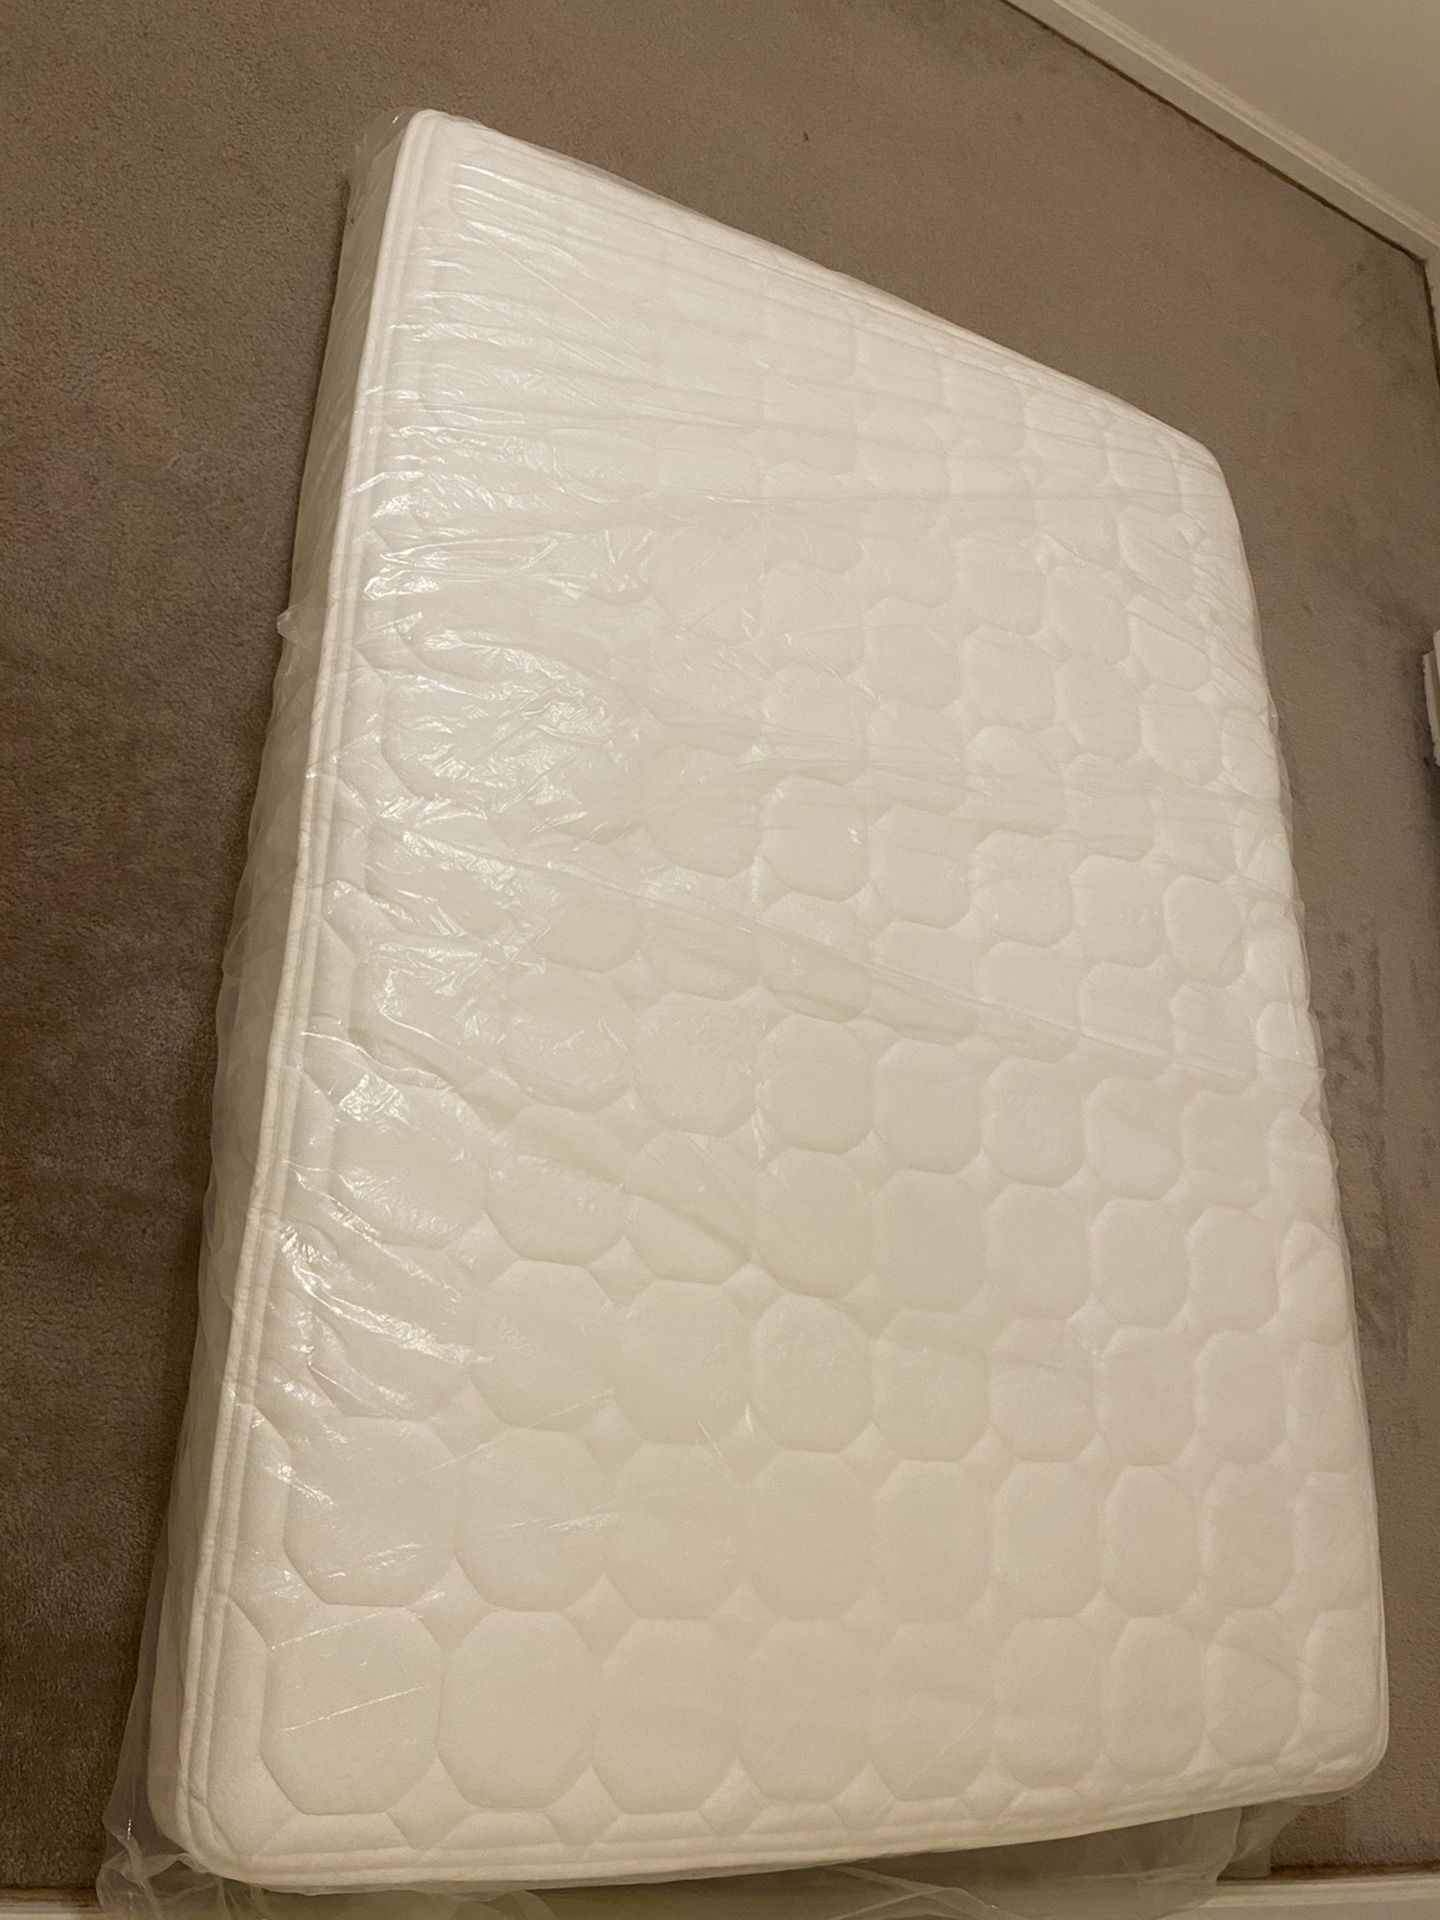 Slumber 1 by Zinus 8" Quilted Pocket Spring Mattress, Full size